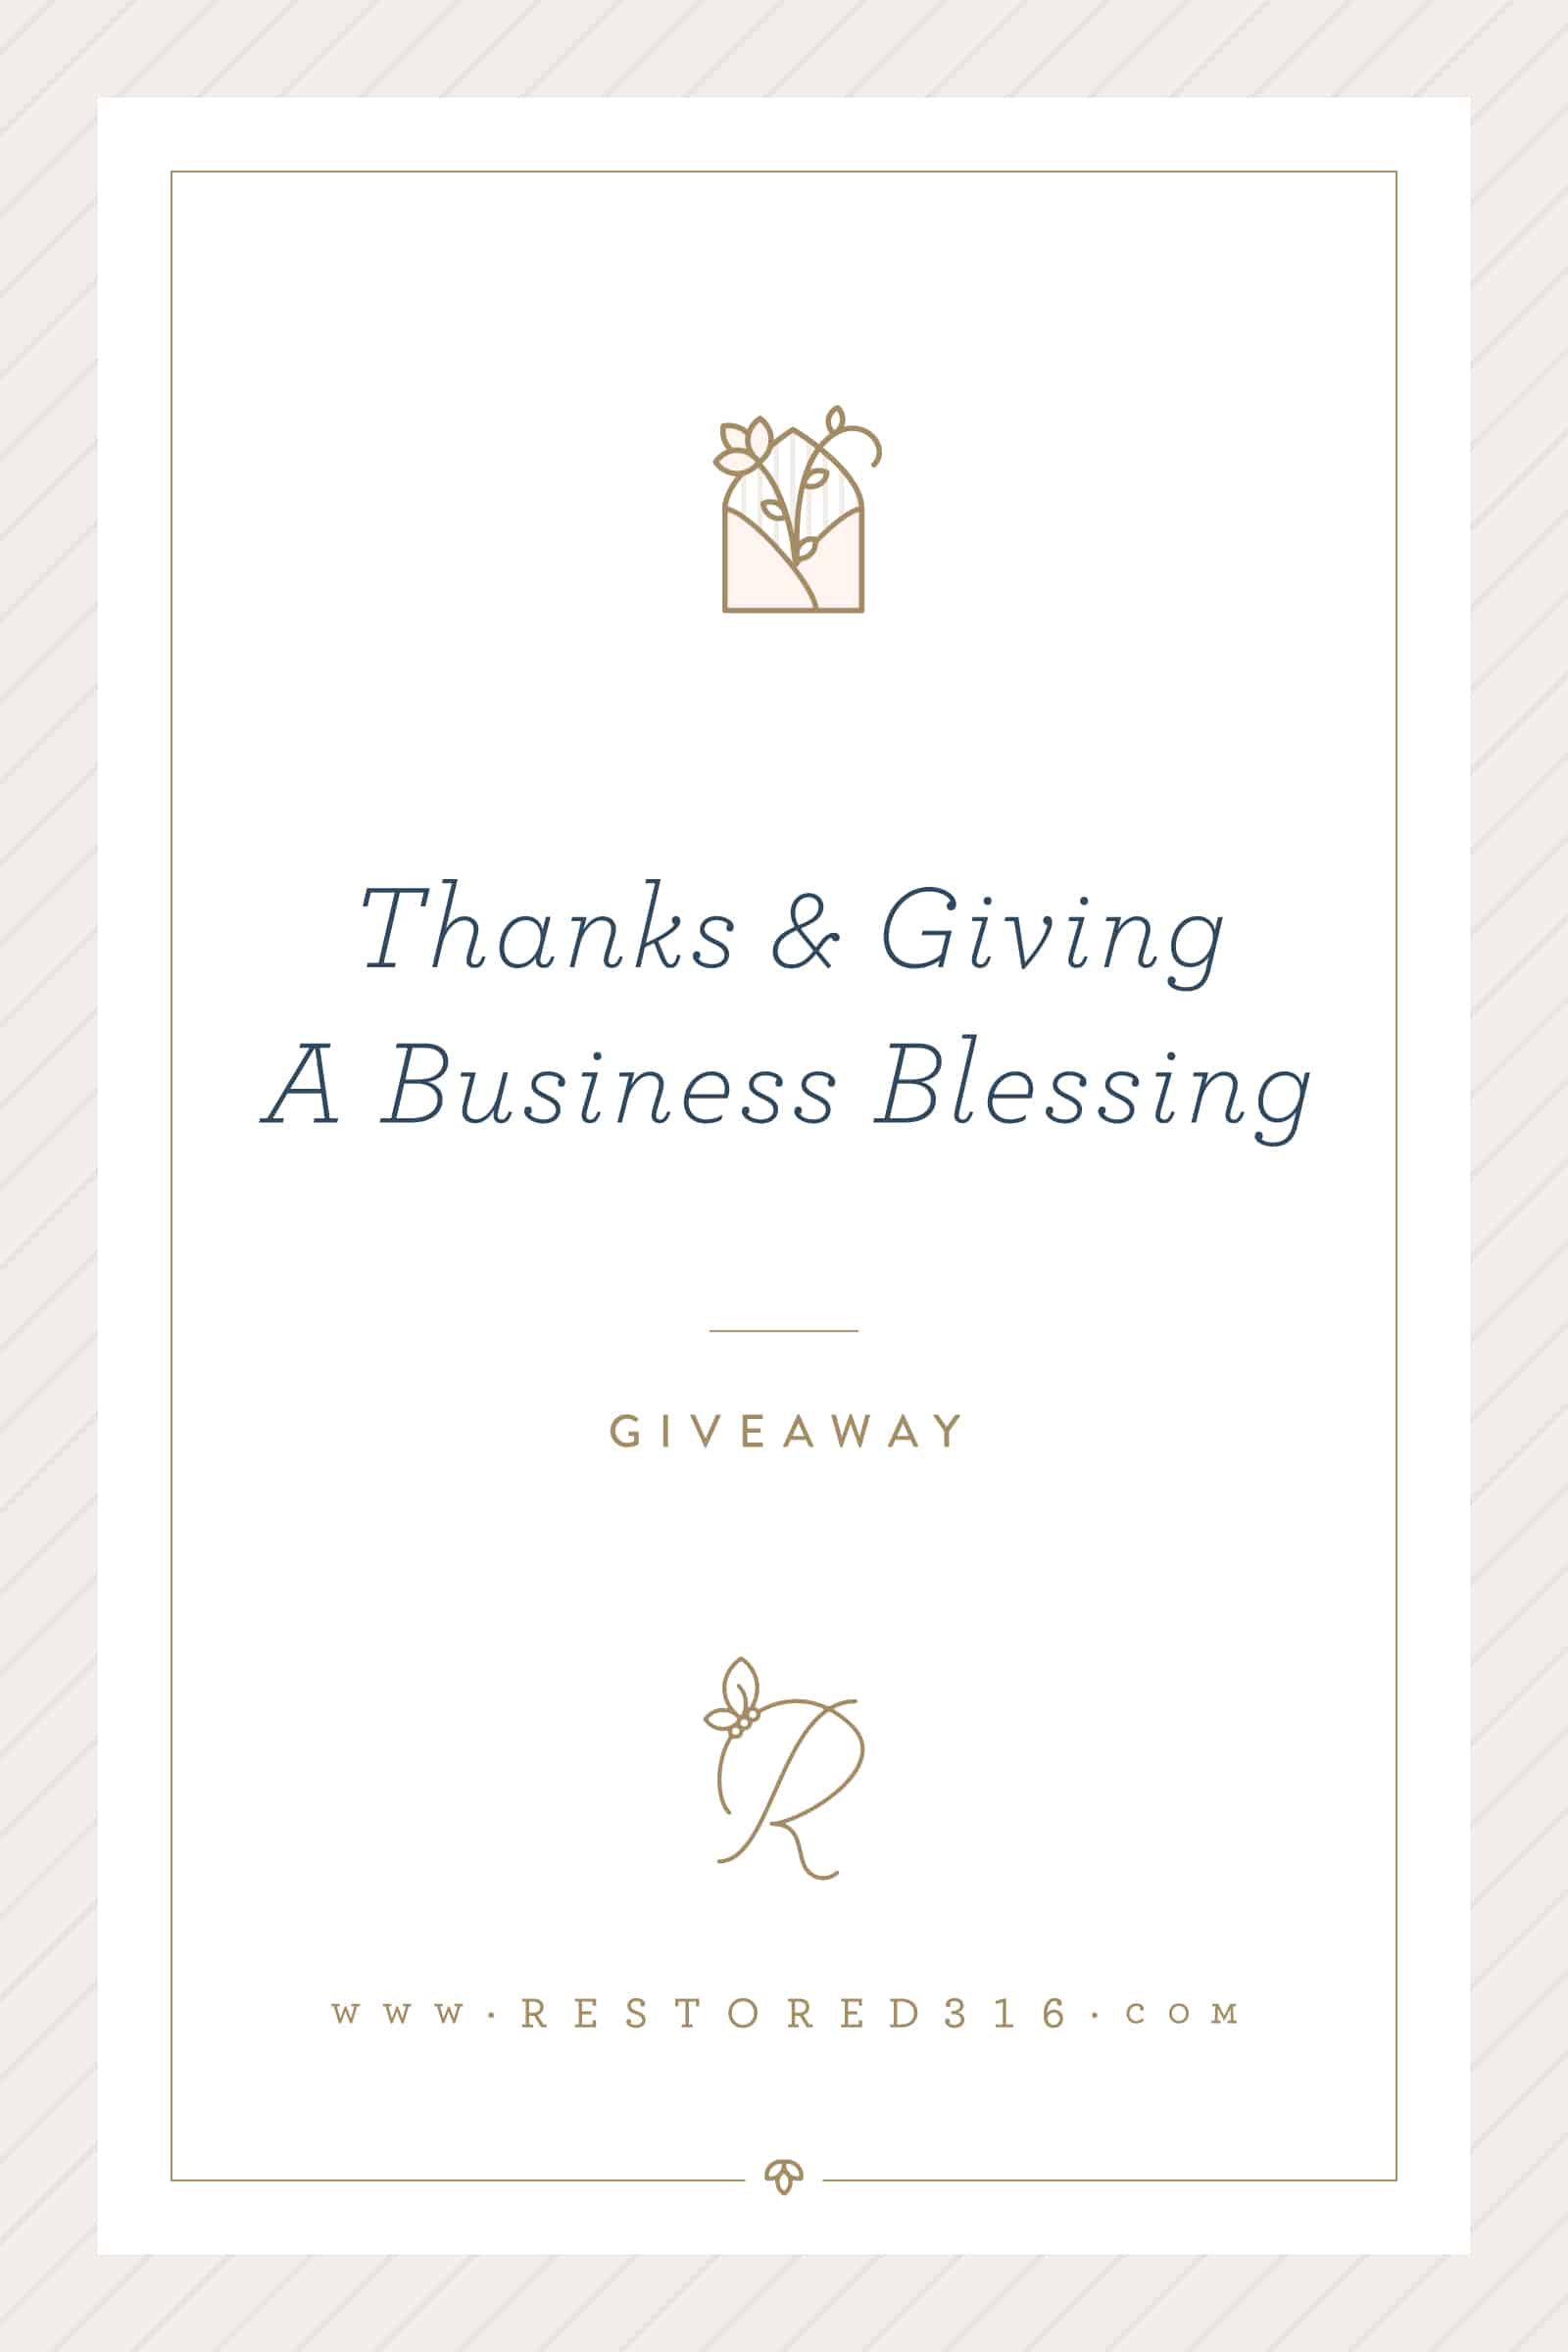 Thanks and Giving A Business Blessing